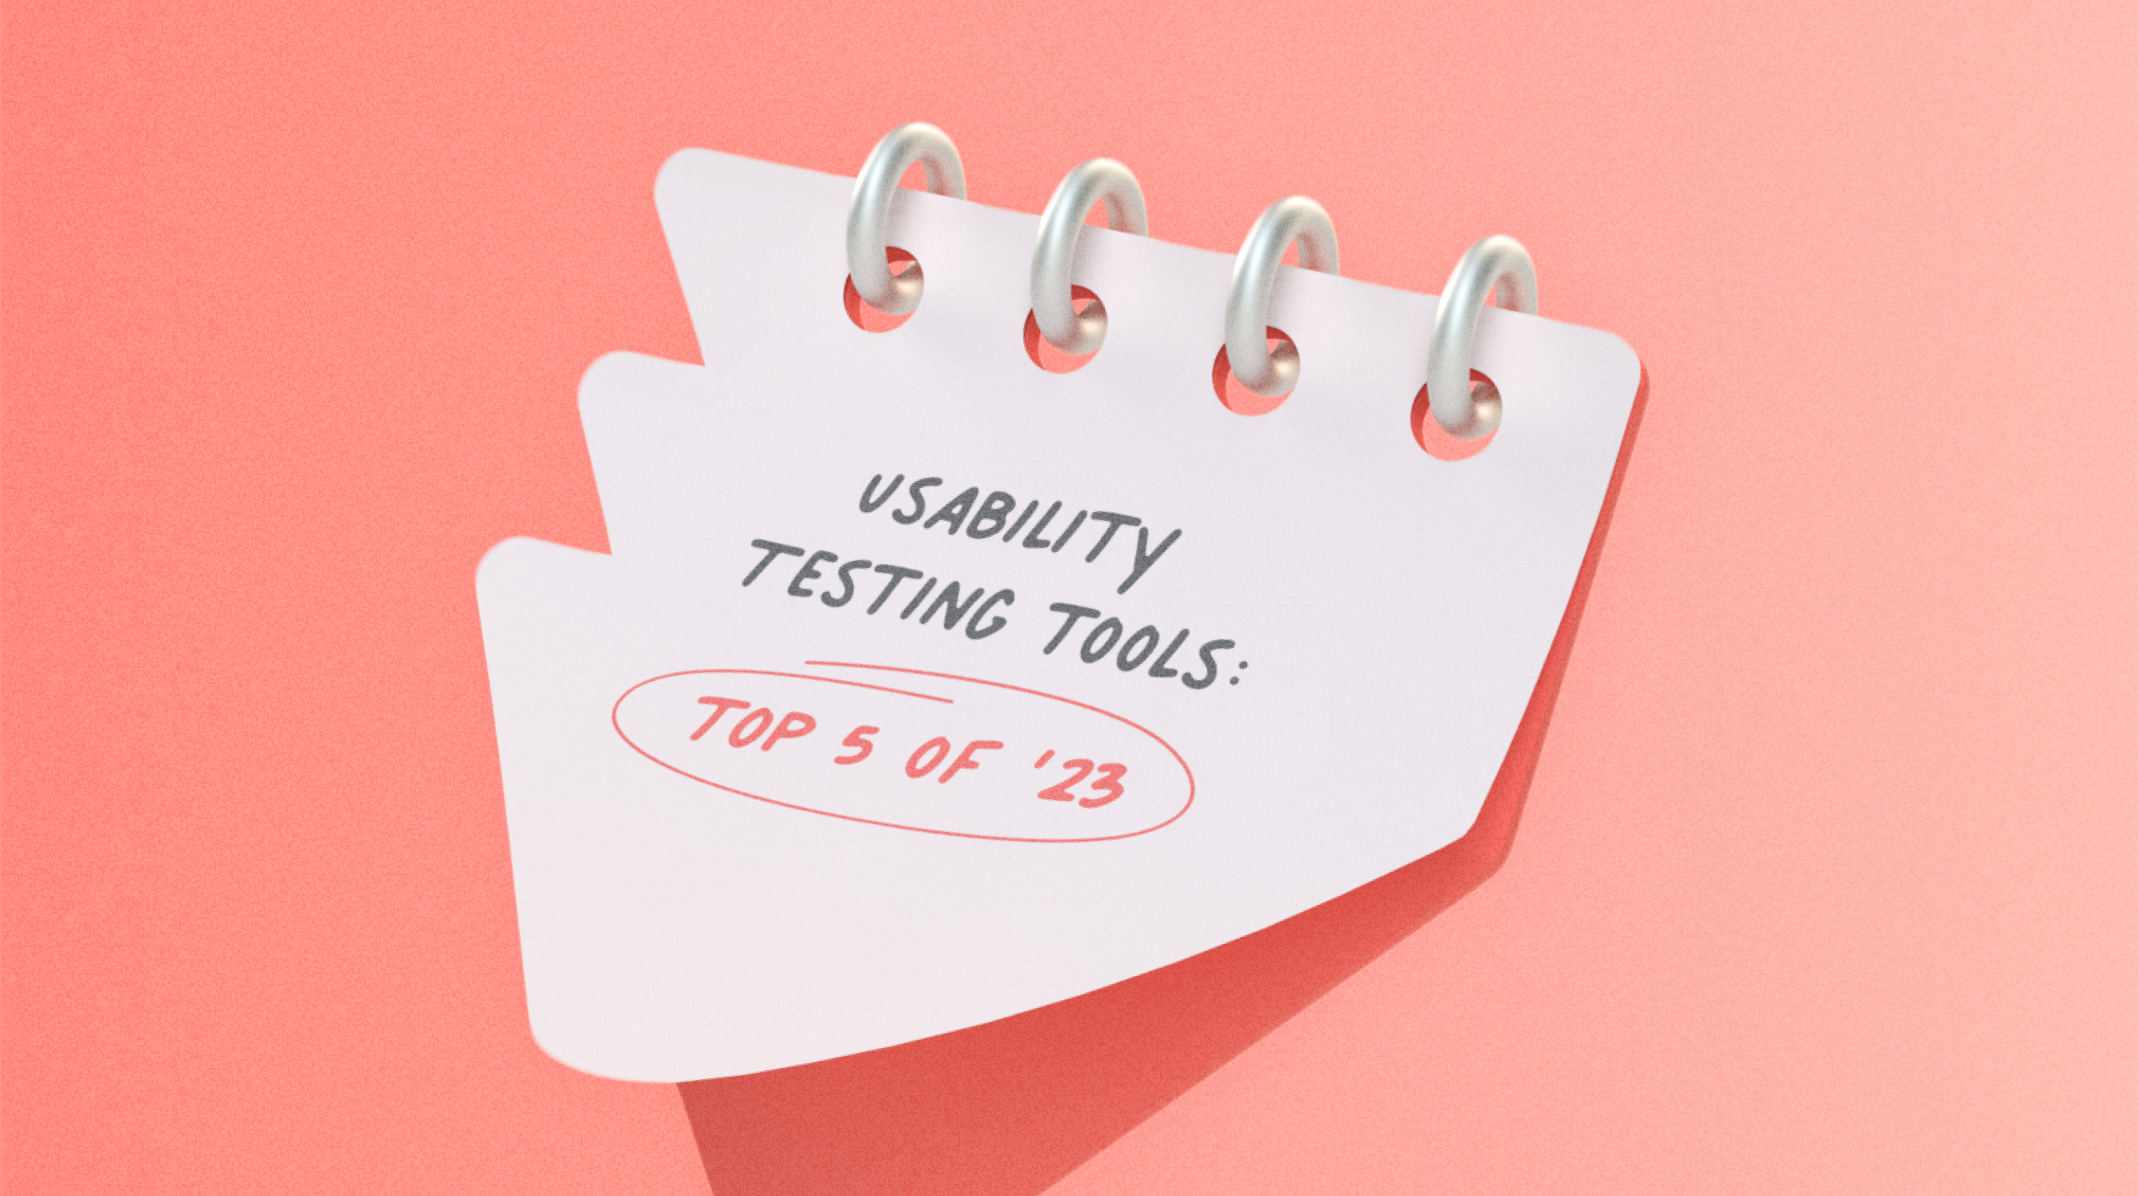 What is the Top 5 Usability Testing Tools in 2023